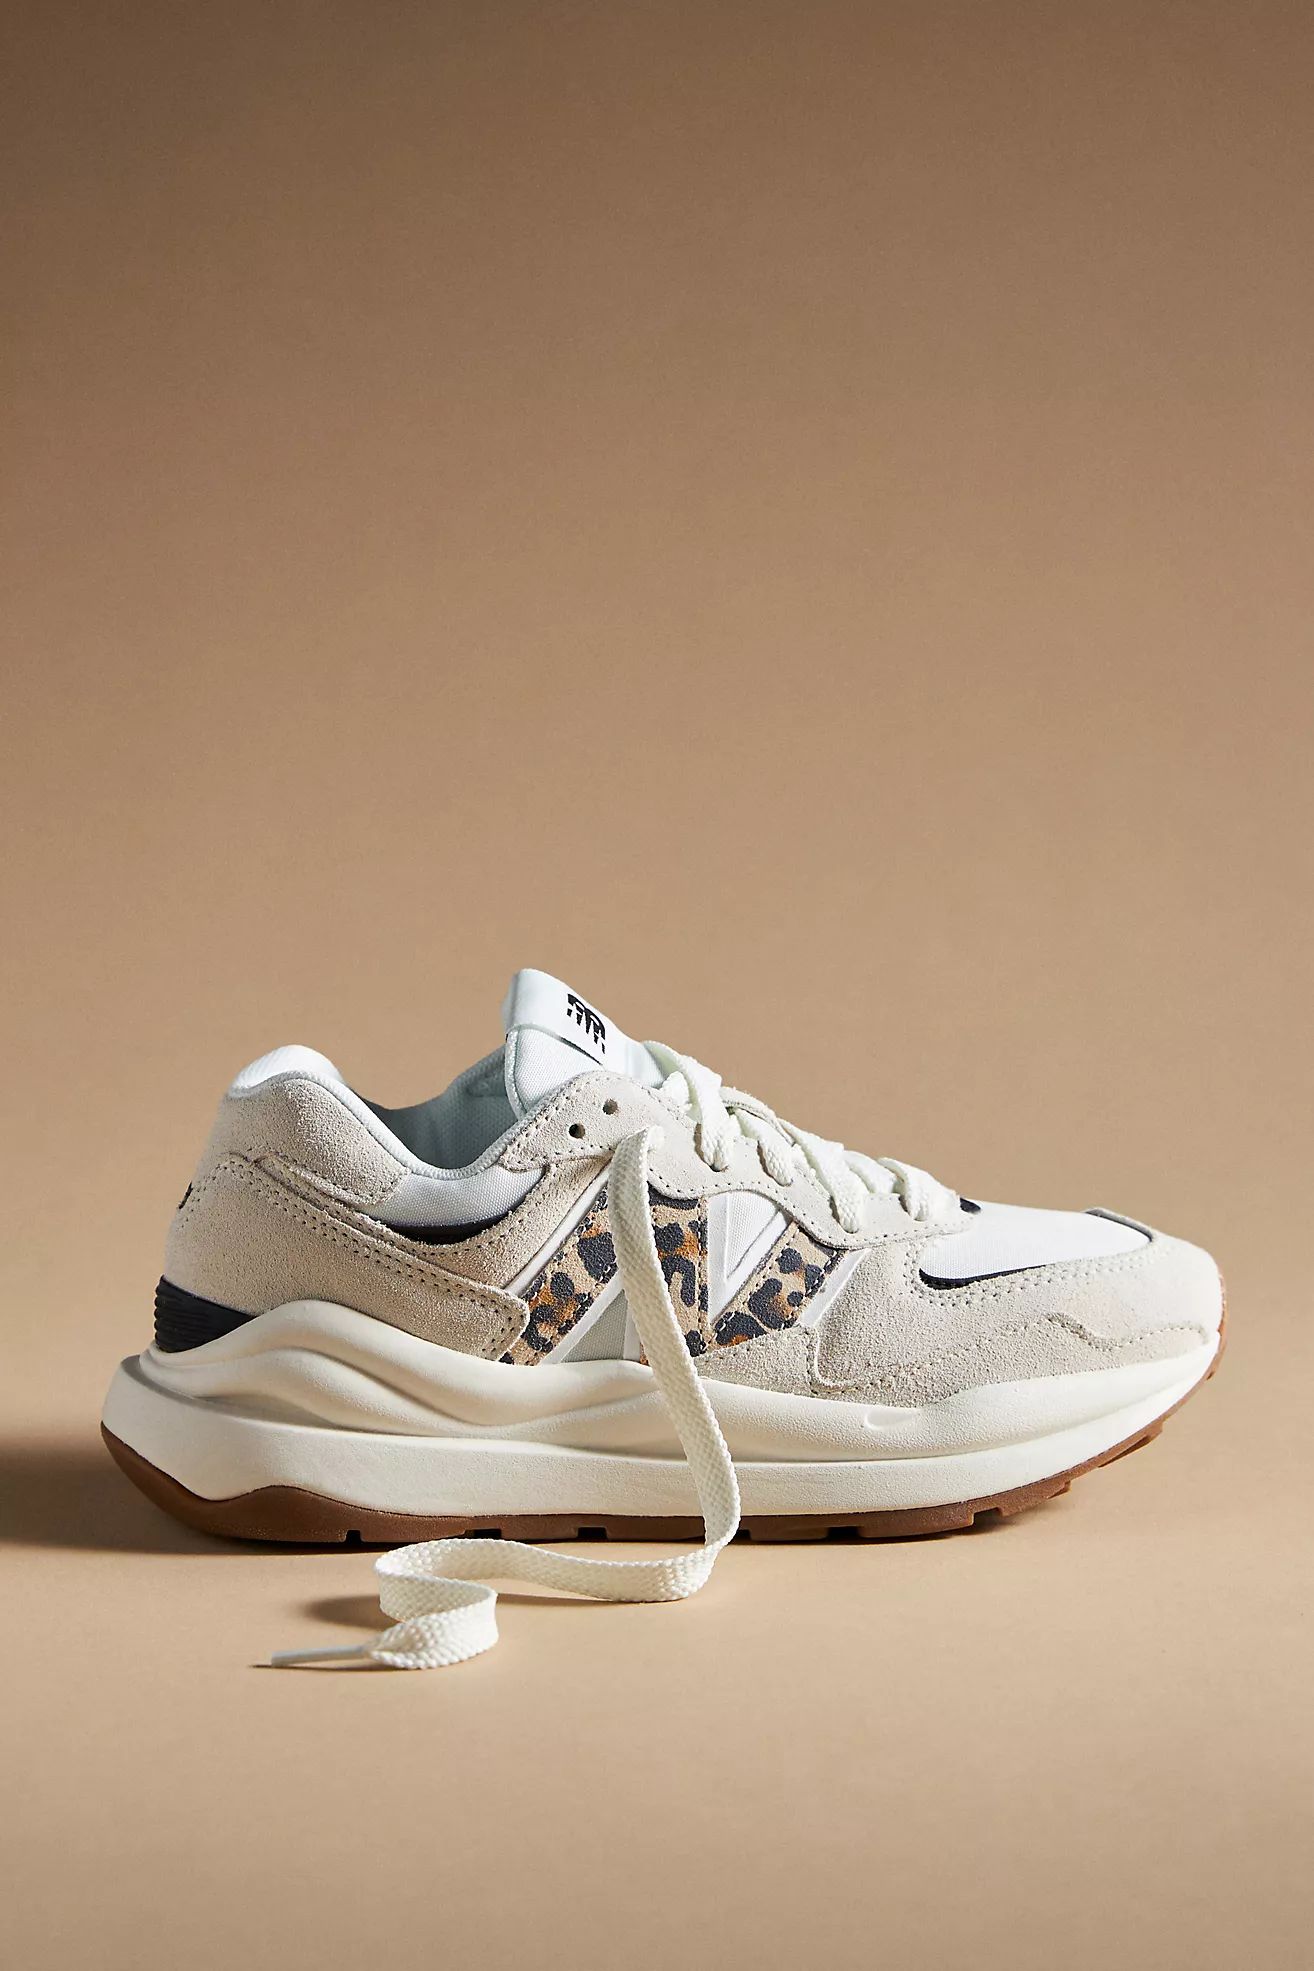 New Balance 5740 Sneakers | Anthropologie (US)